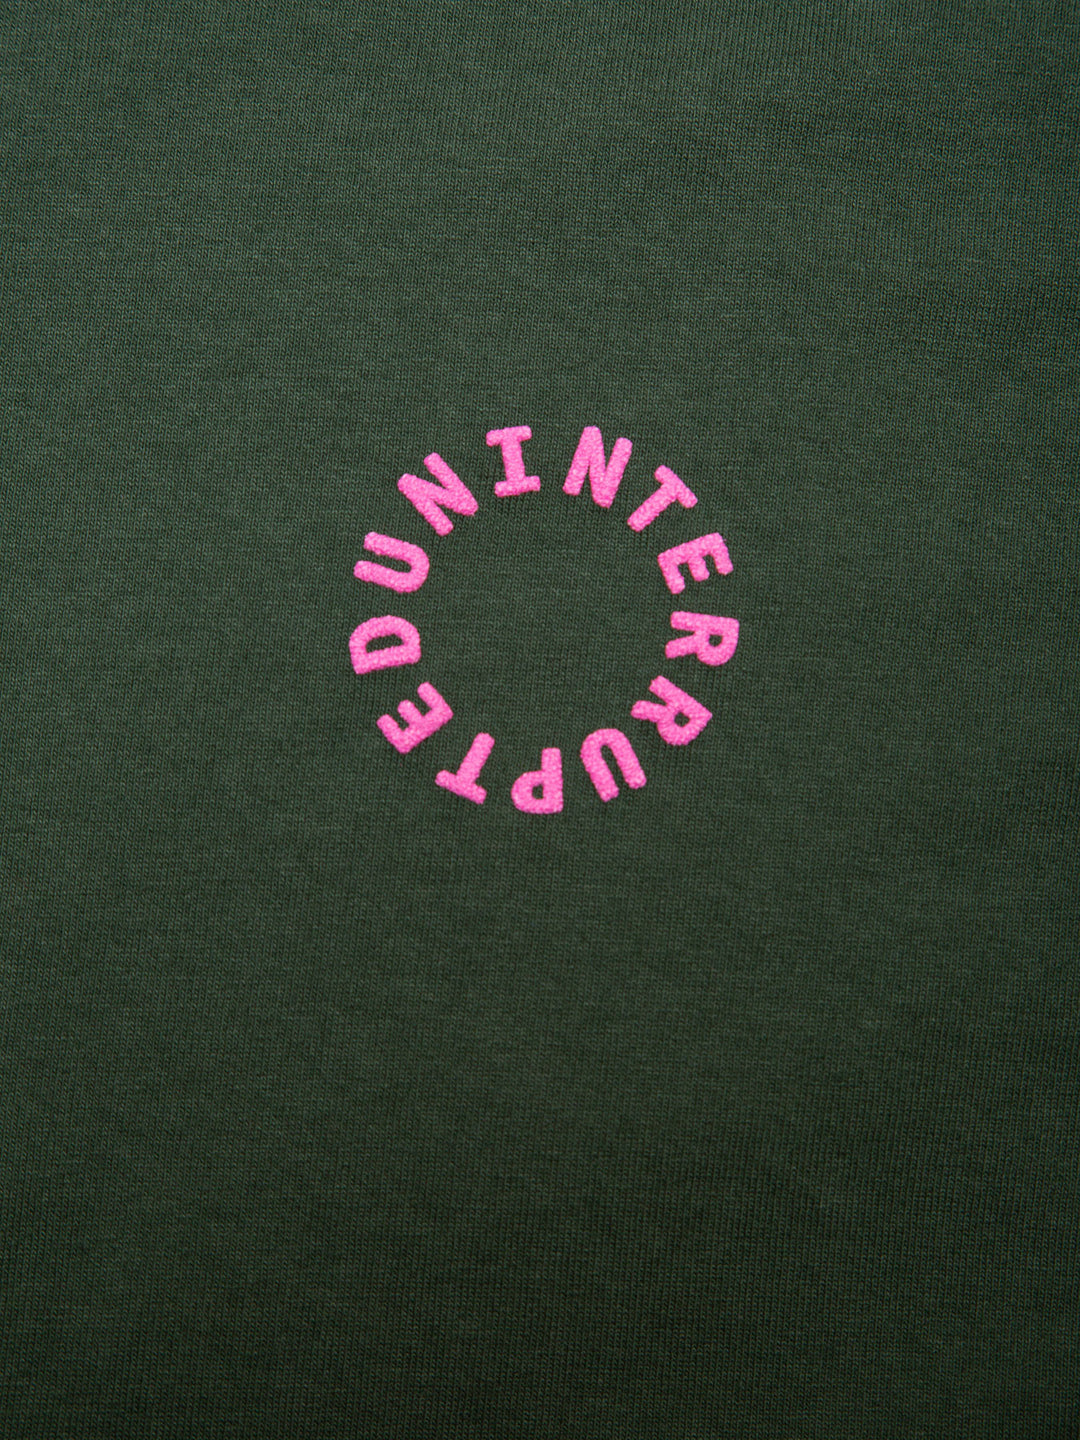 MORE THAN EMPOWERMENT ATTRIBUTE TEE GREEN - close up on uninterrupted pink logo